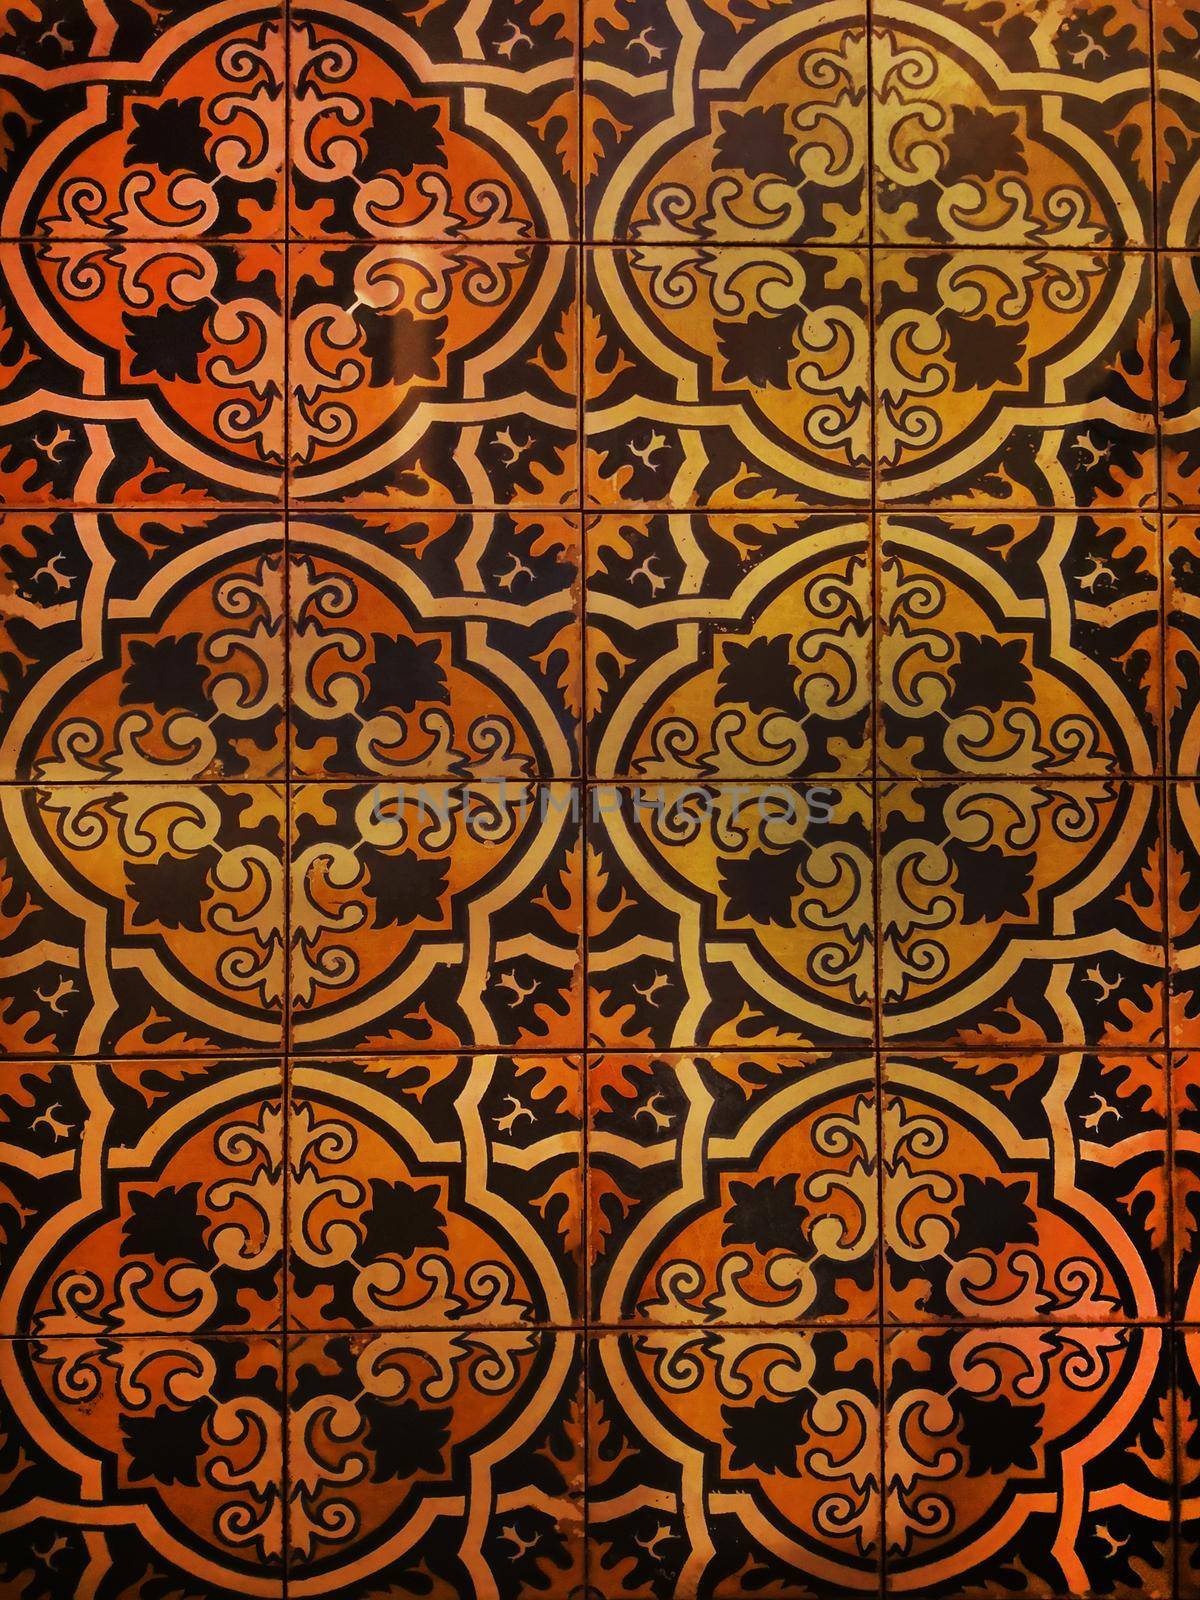 Spanish tile with beautiful figured pattern, brown, orange and black colors